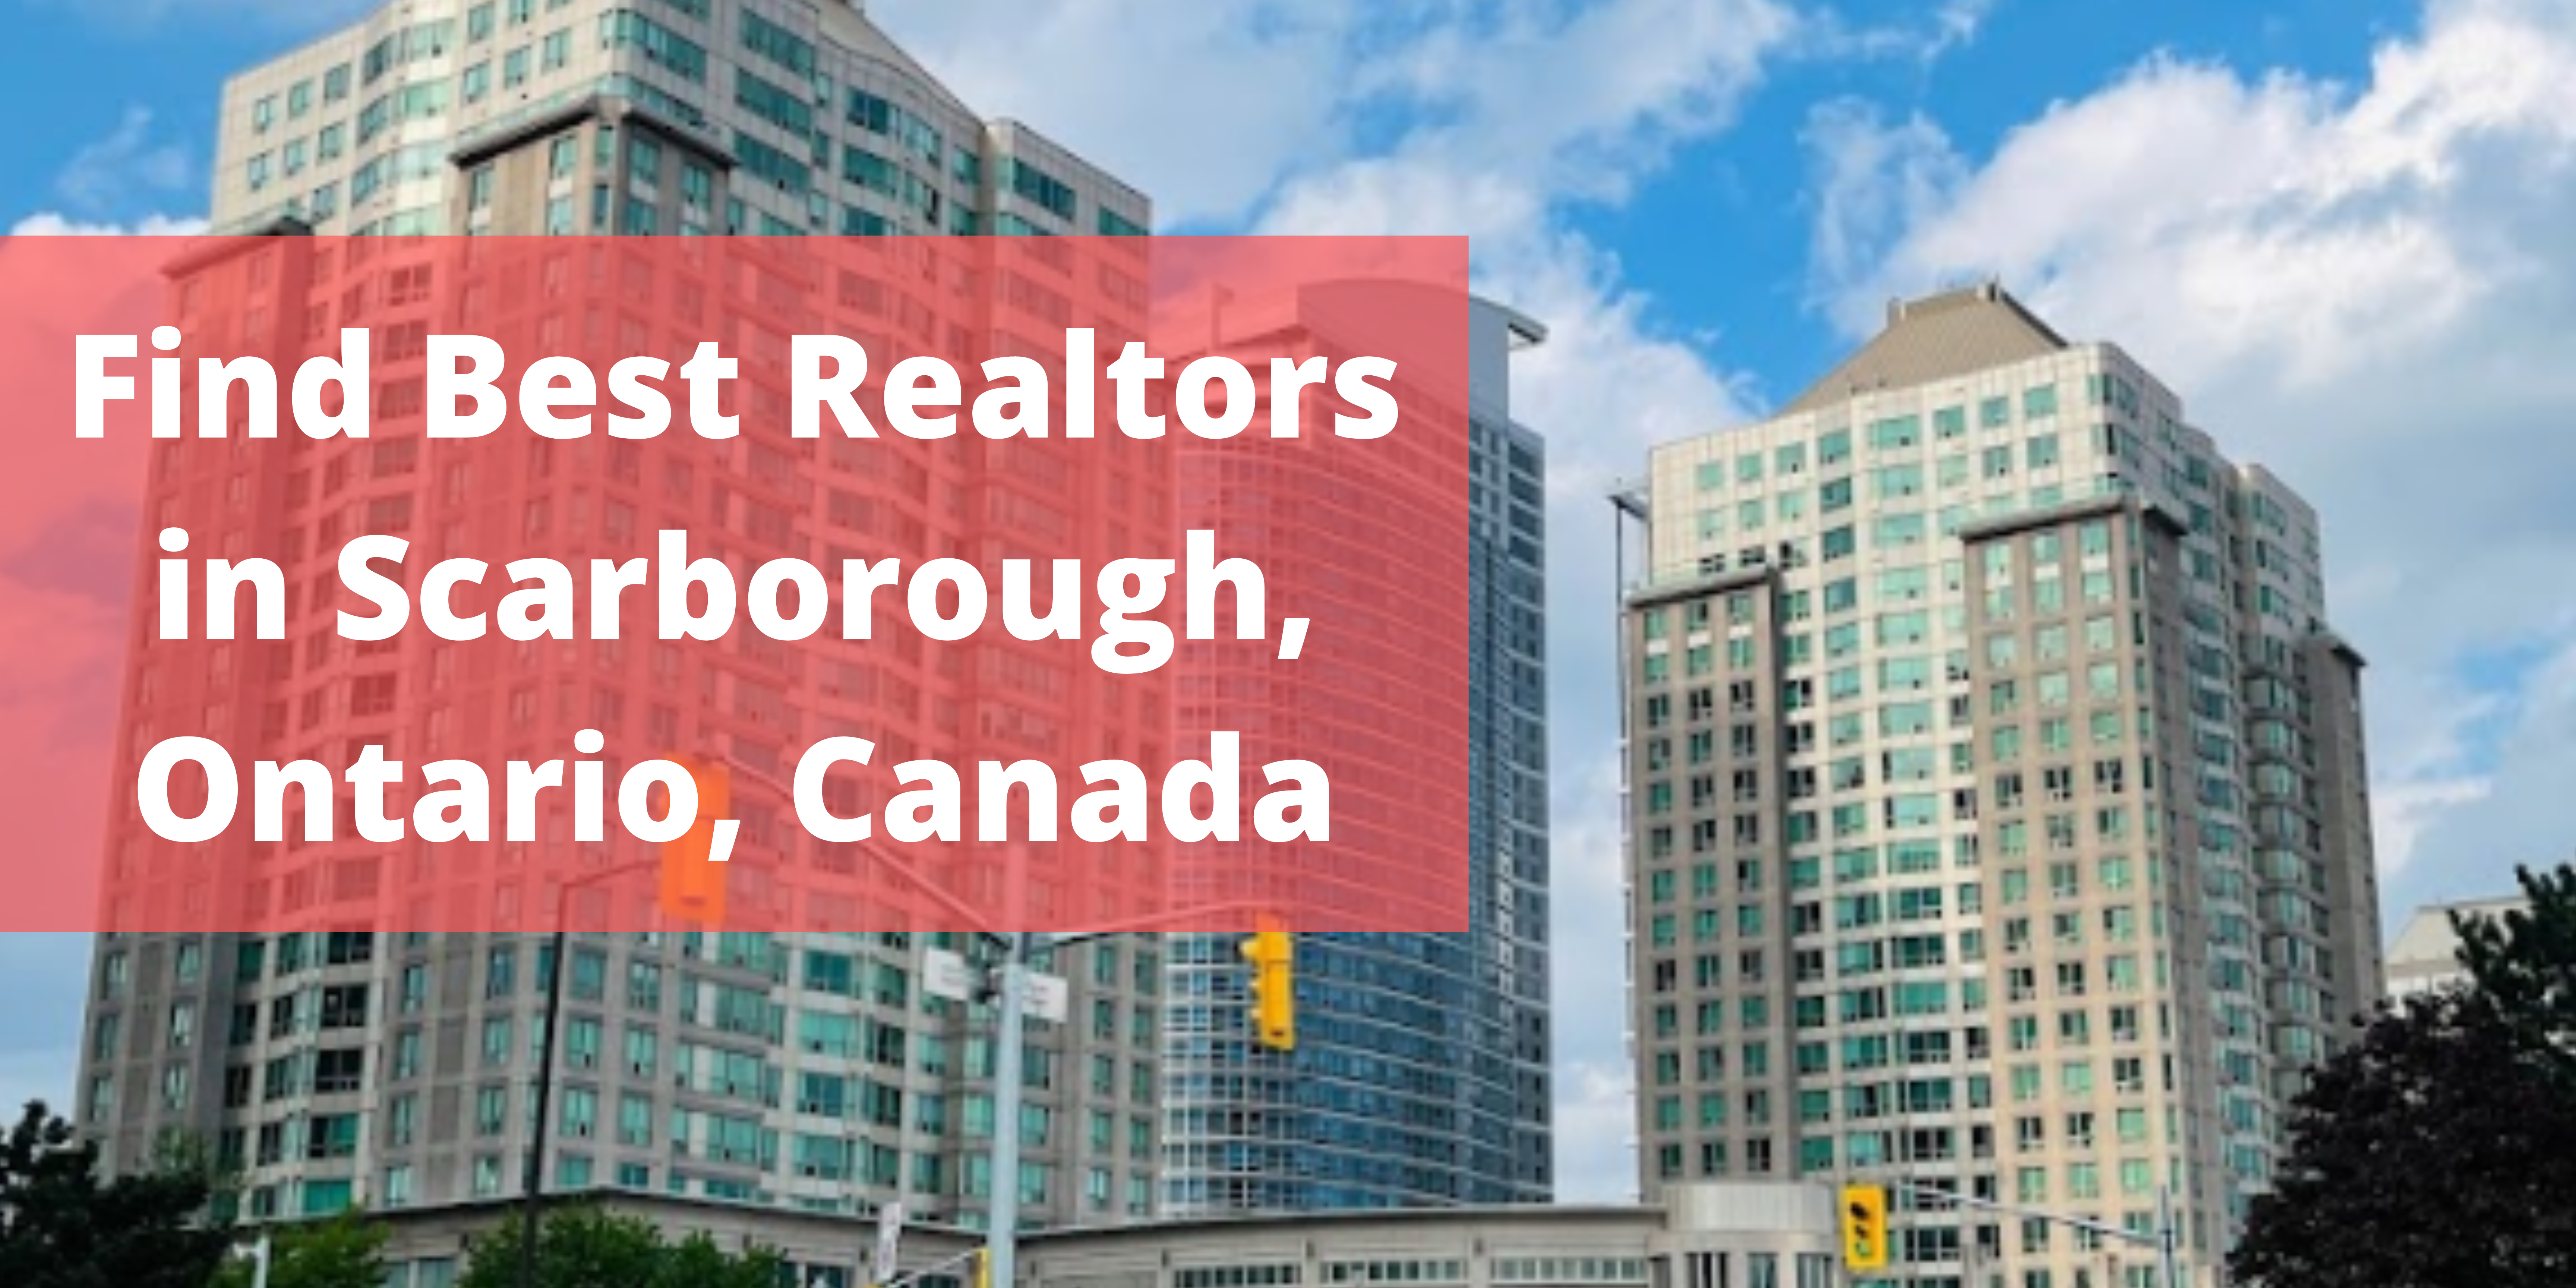 How to Find Best Realtors in Scarborough, Ontario, Canada.